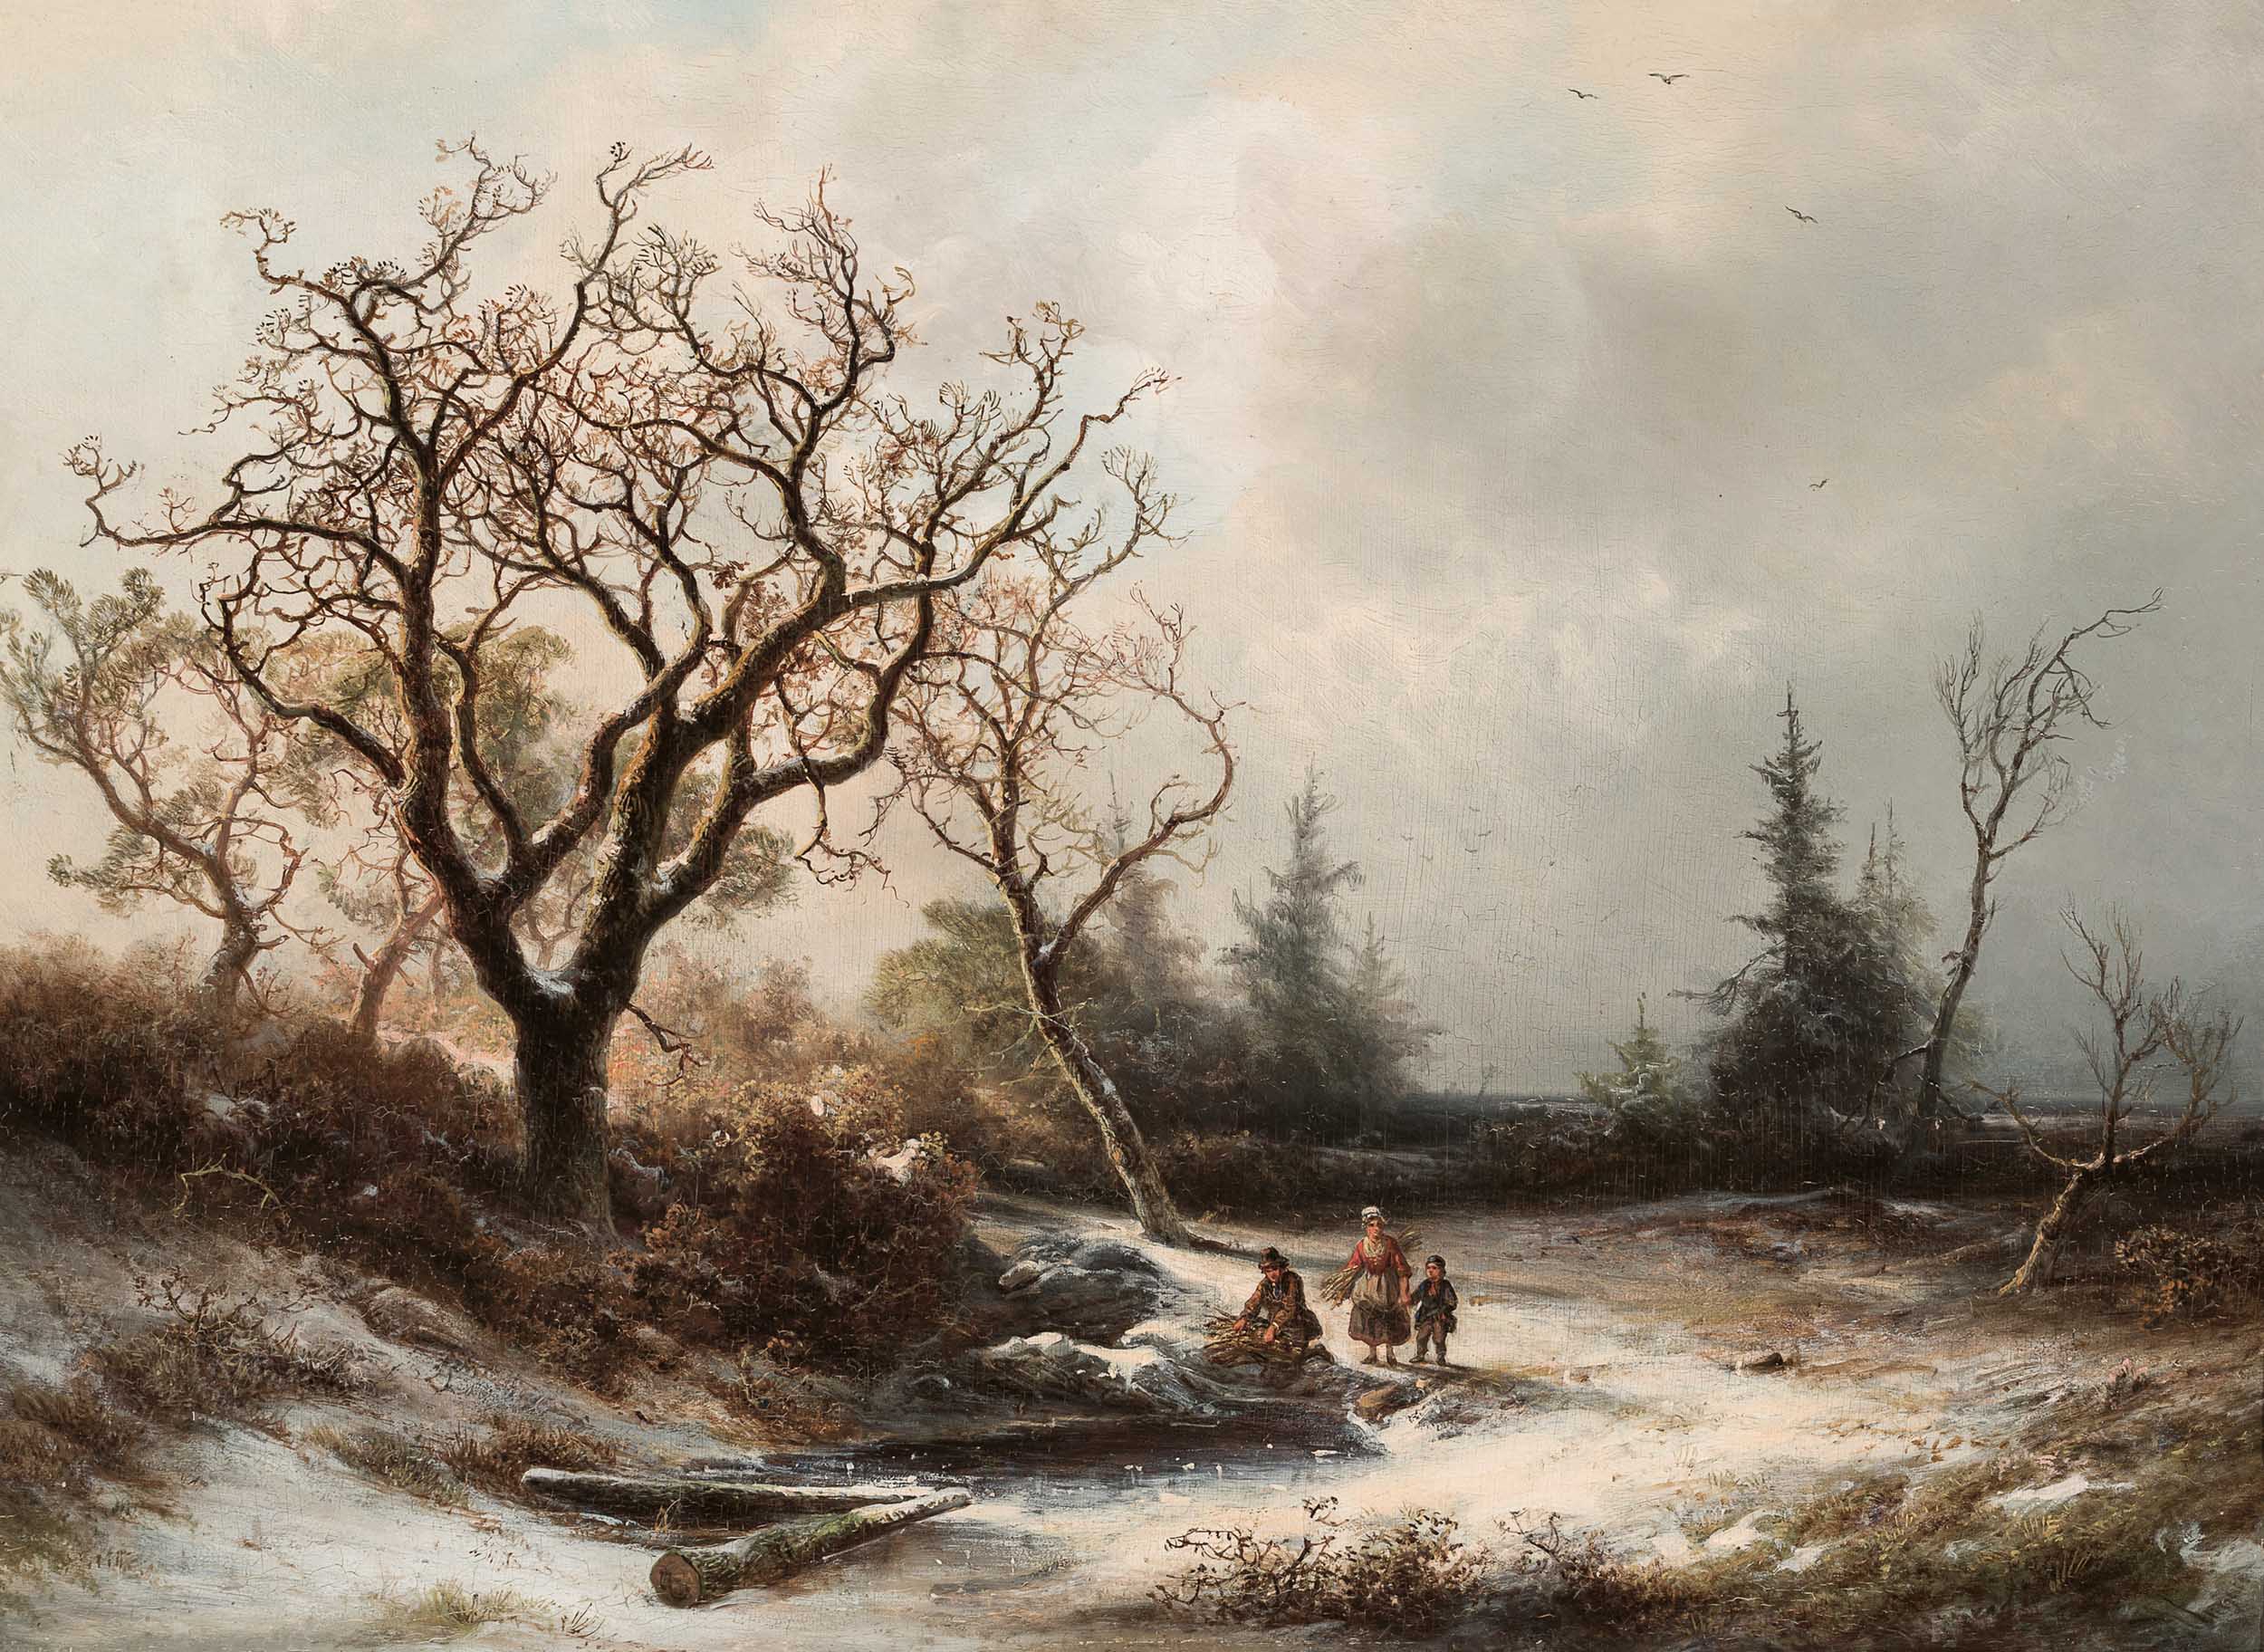 Wood Gatherers in a Snowy Landscape